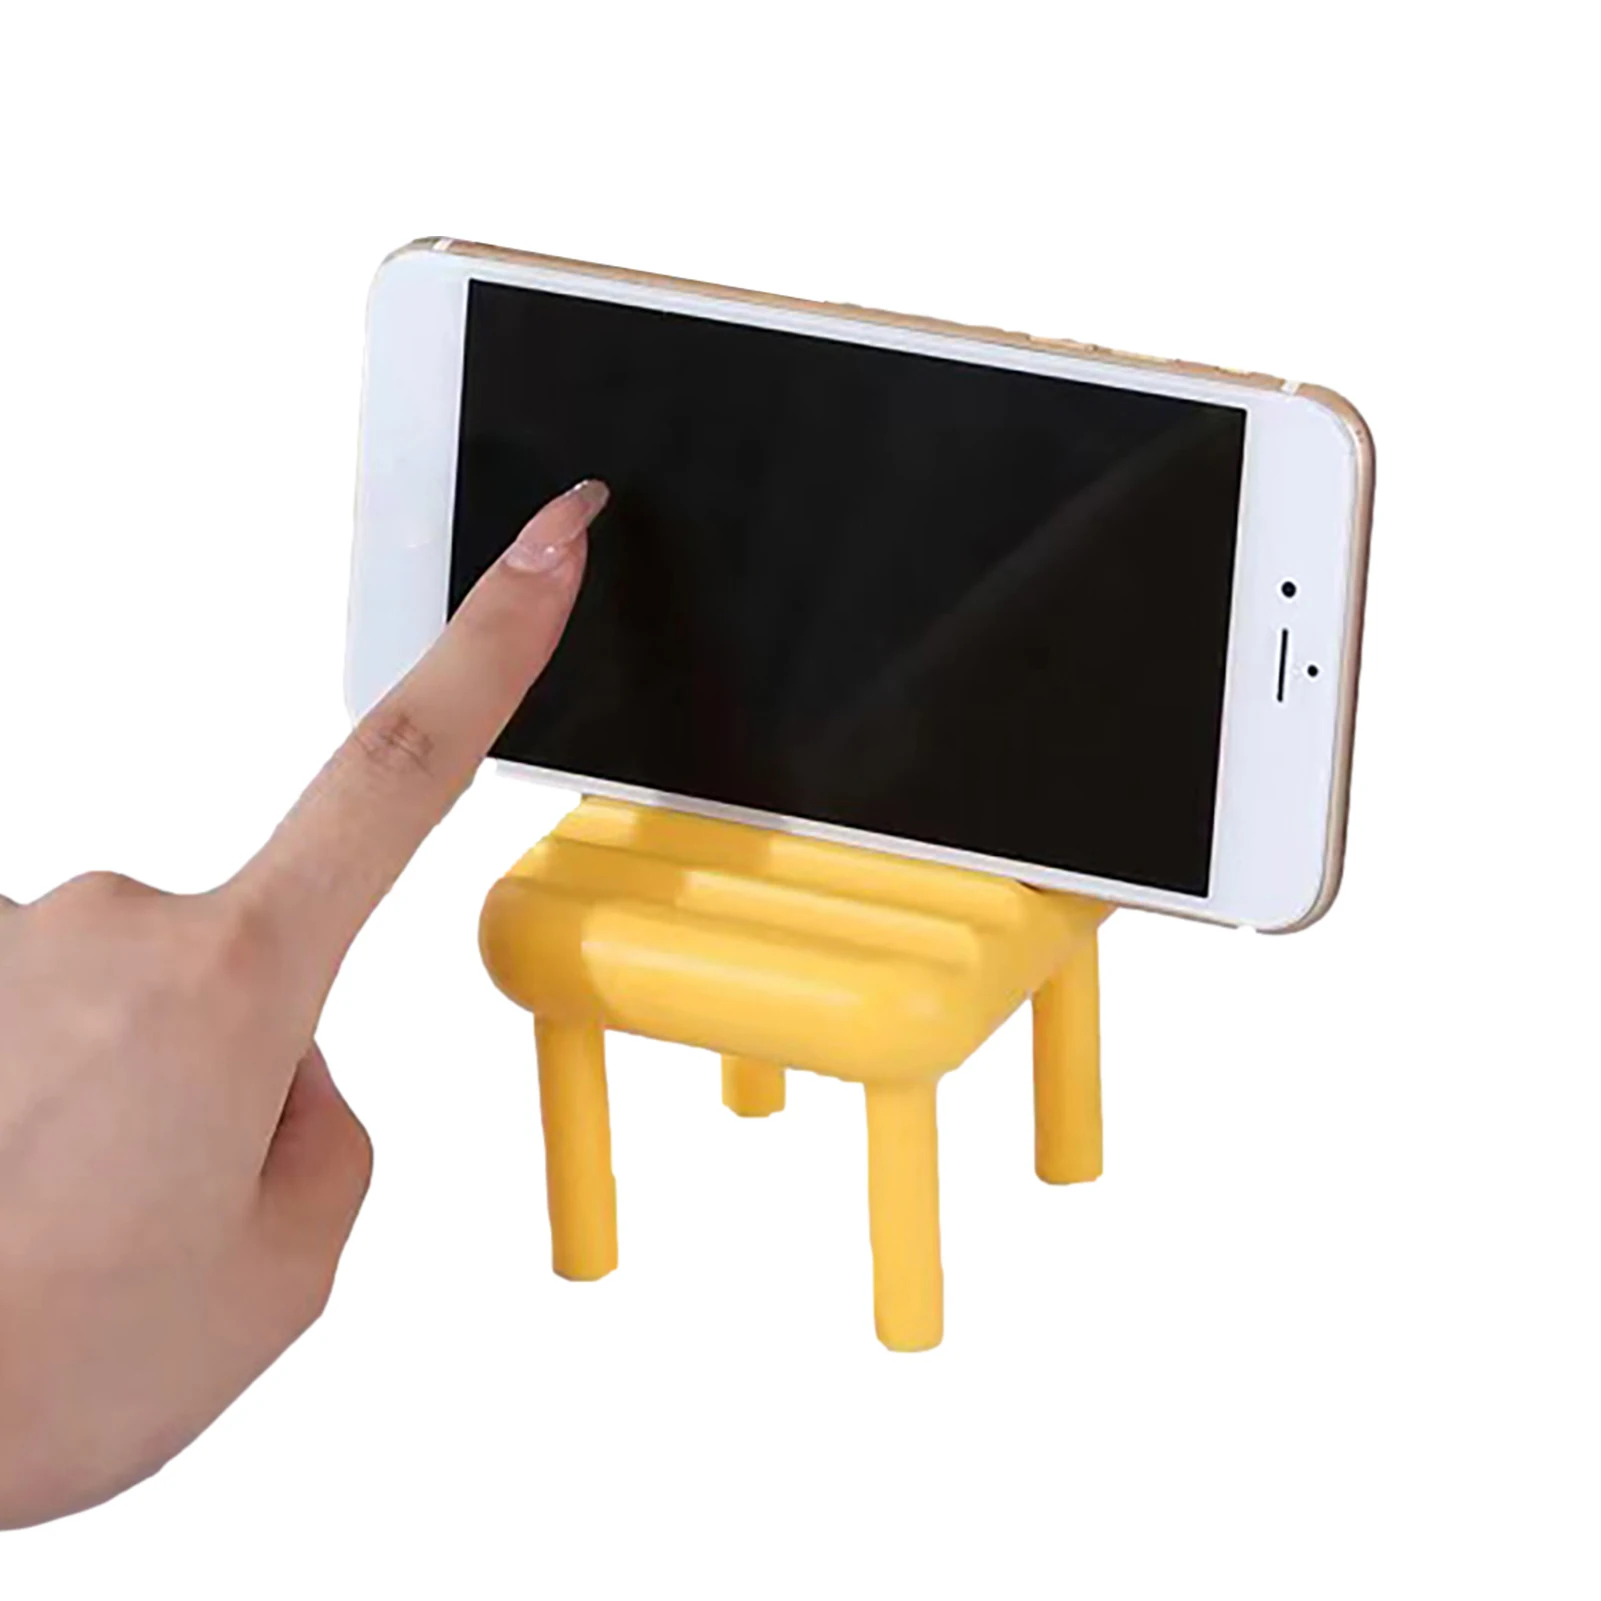 

Mobile Phone Holder Mini Creative Cellphone Stand Portable Chair Shape Phone Mount Multi-Angle Cradle Comfortable Eye Protection